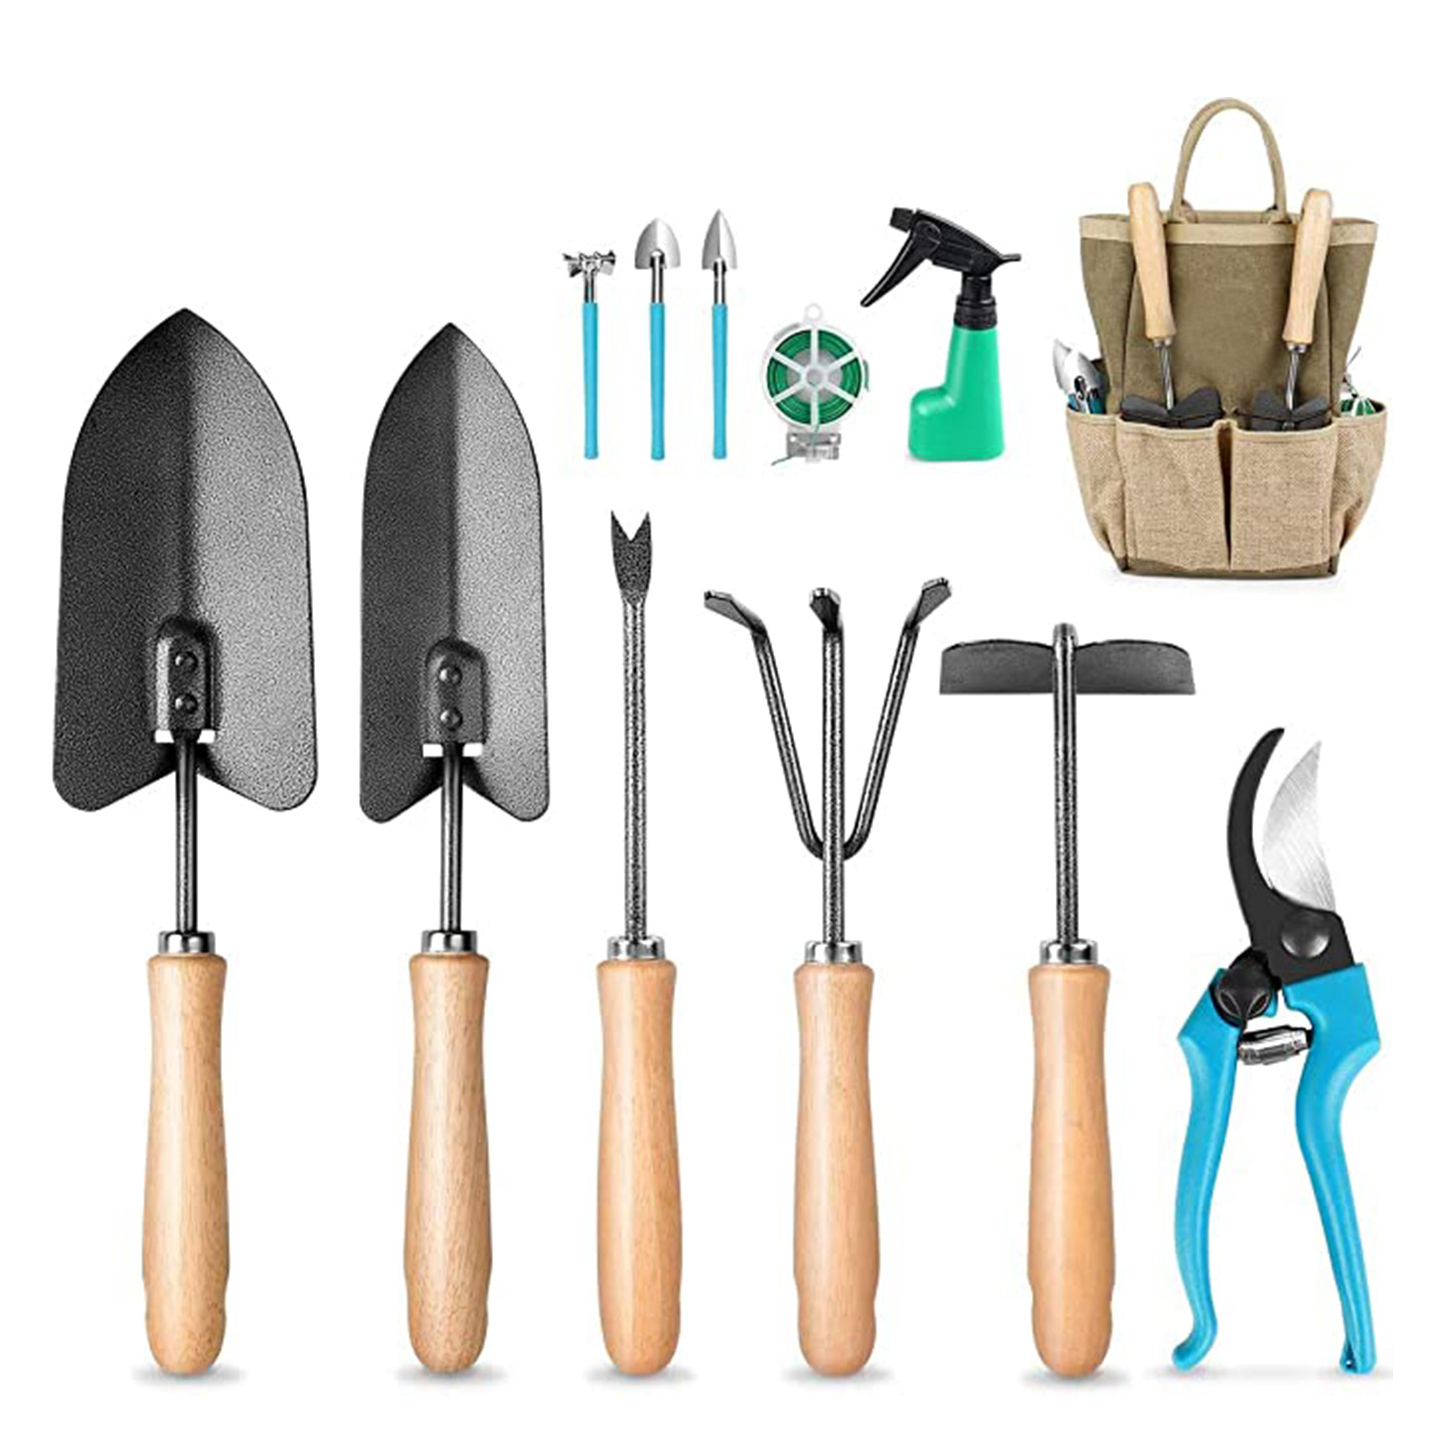 New Fashion Design for Pink Gardening Tools - 12PCS Garden Tools with Cloth Bag – MACHINERY TOOLS